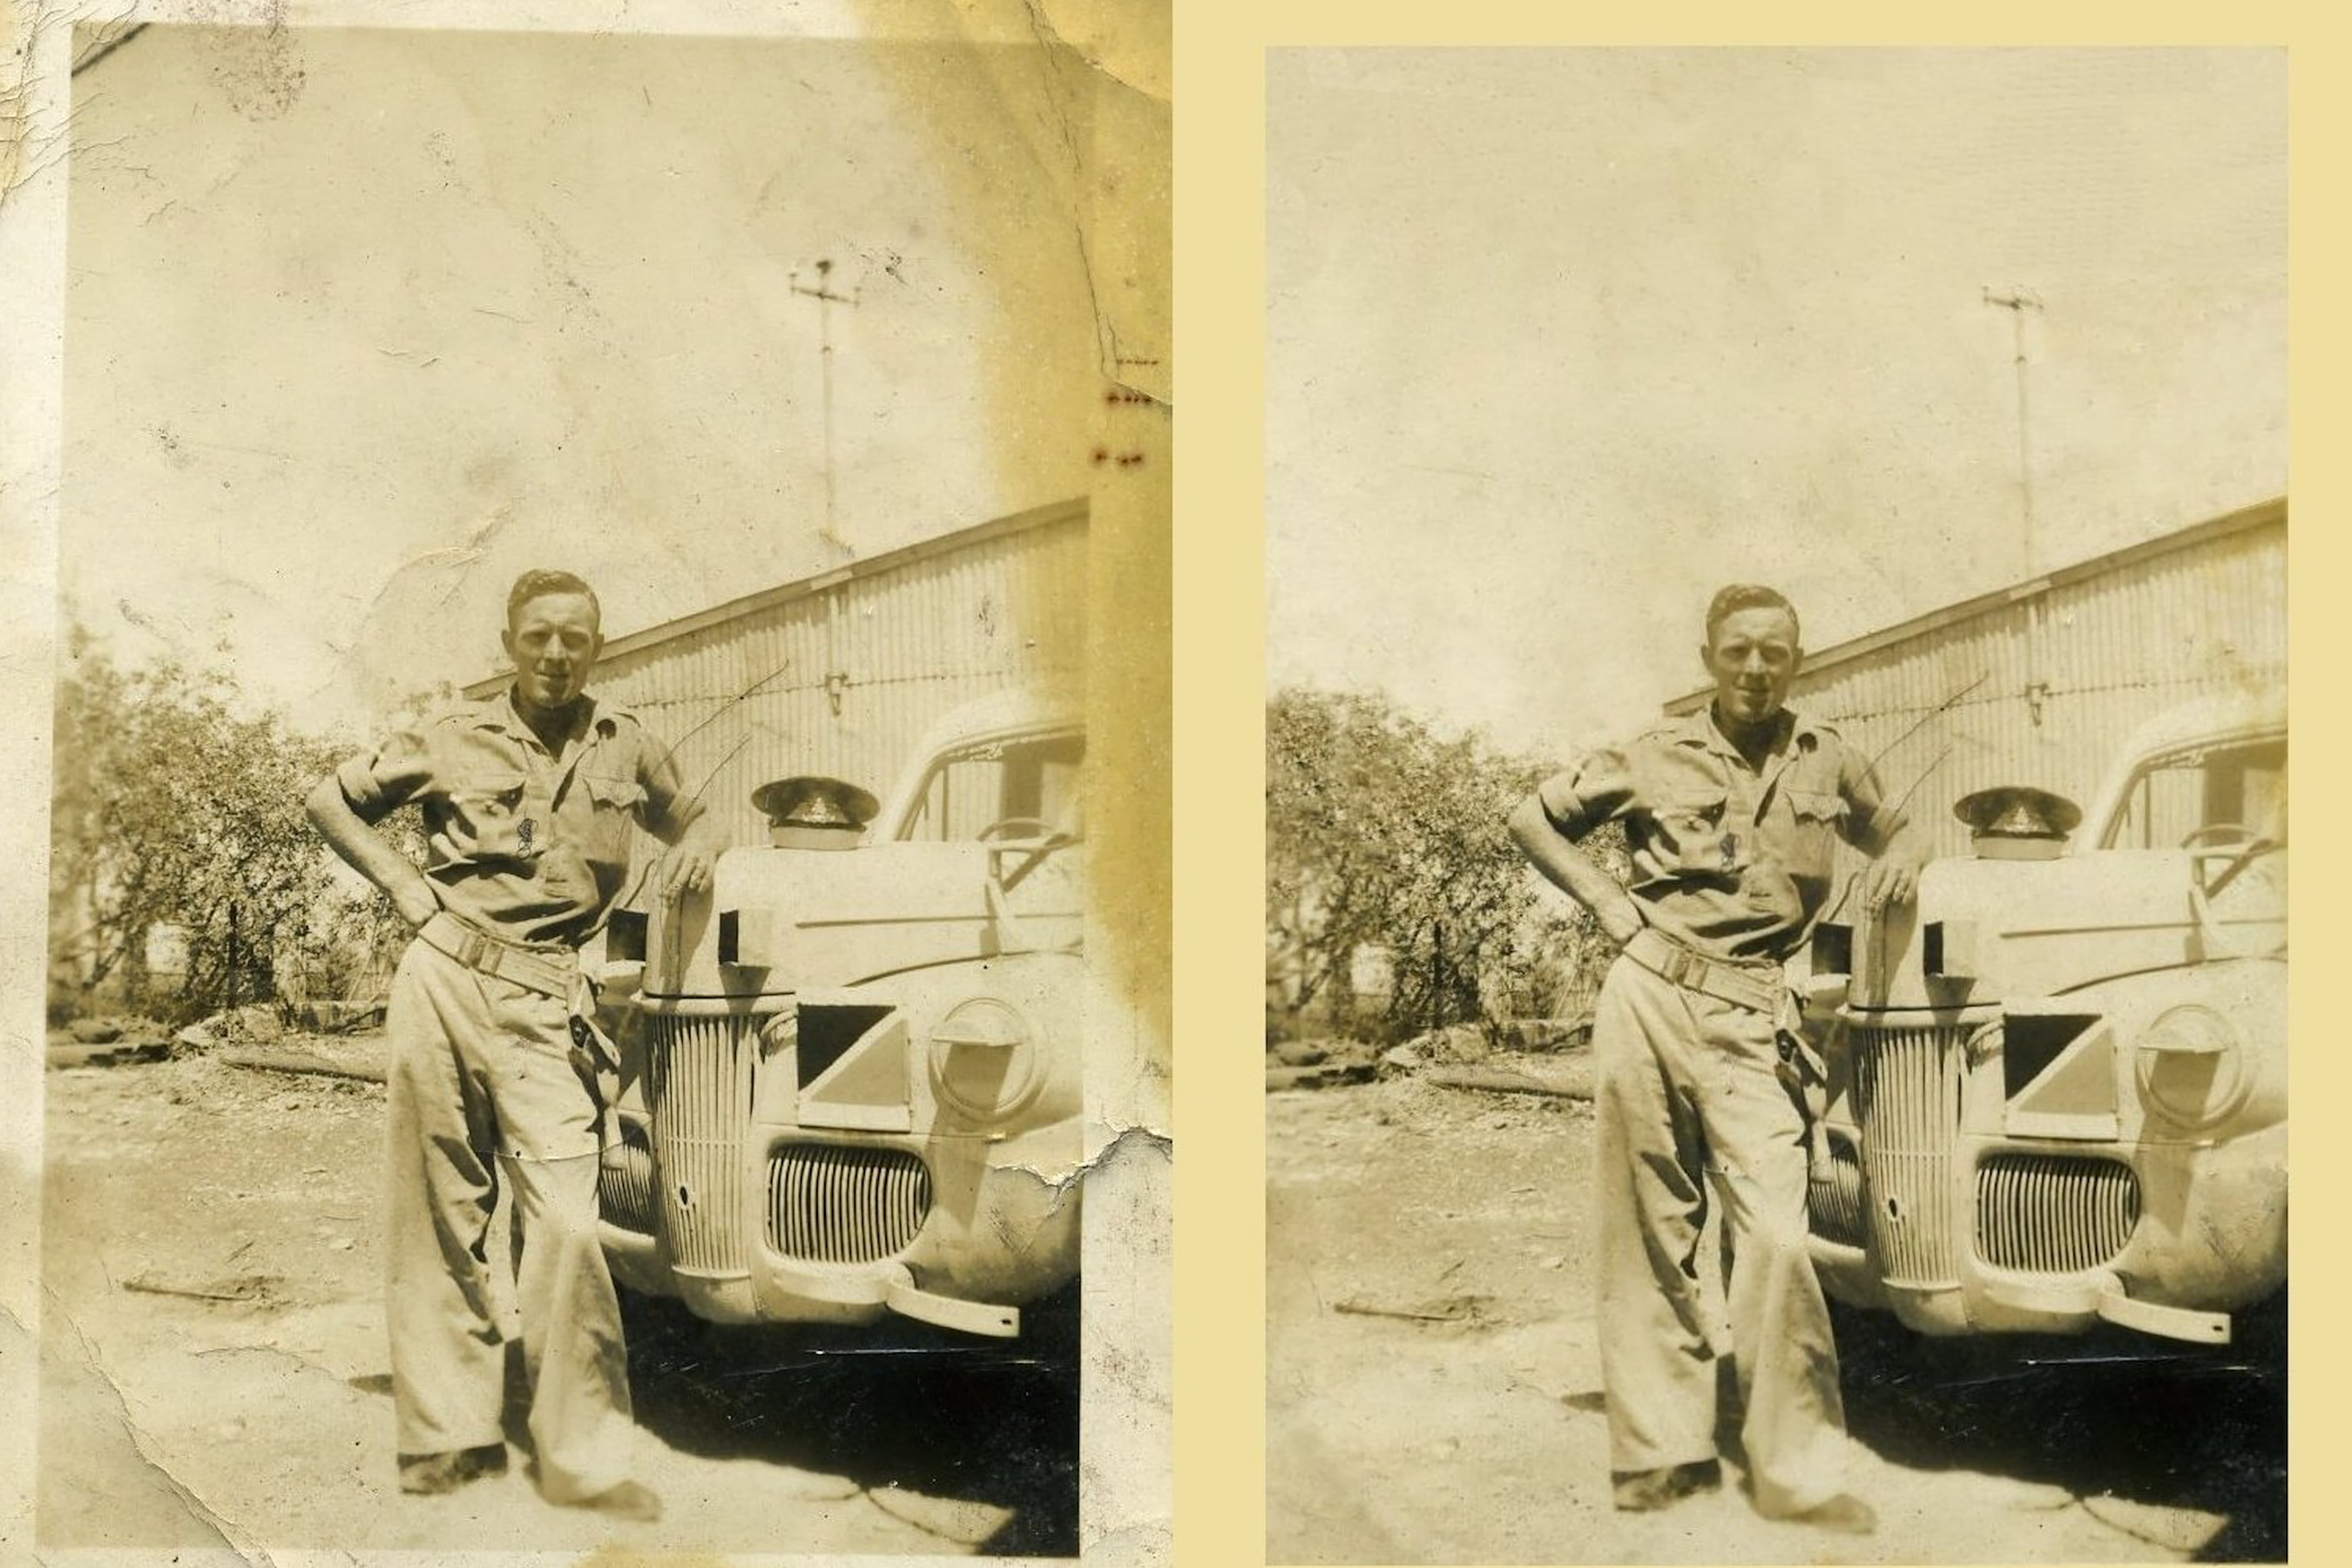 Before and after comparison of restoration of an old photograph using photo editing software